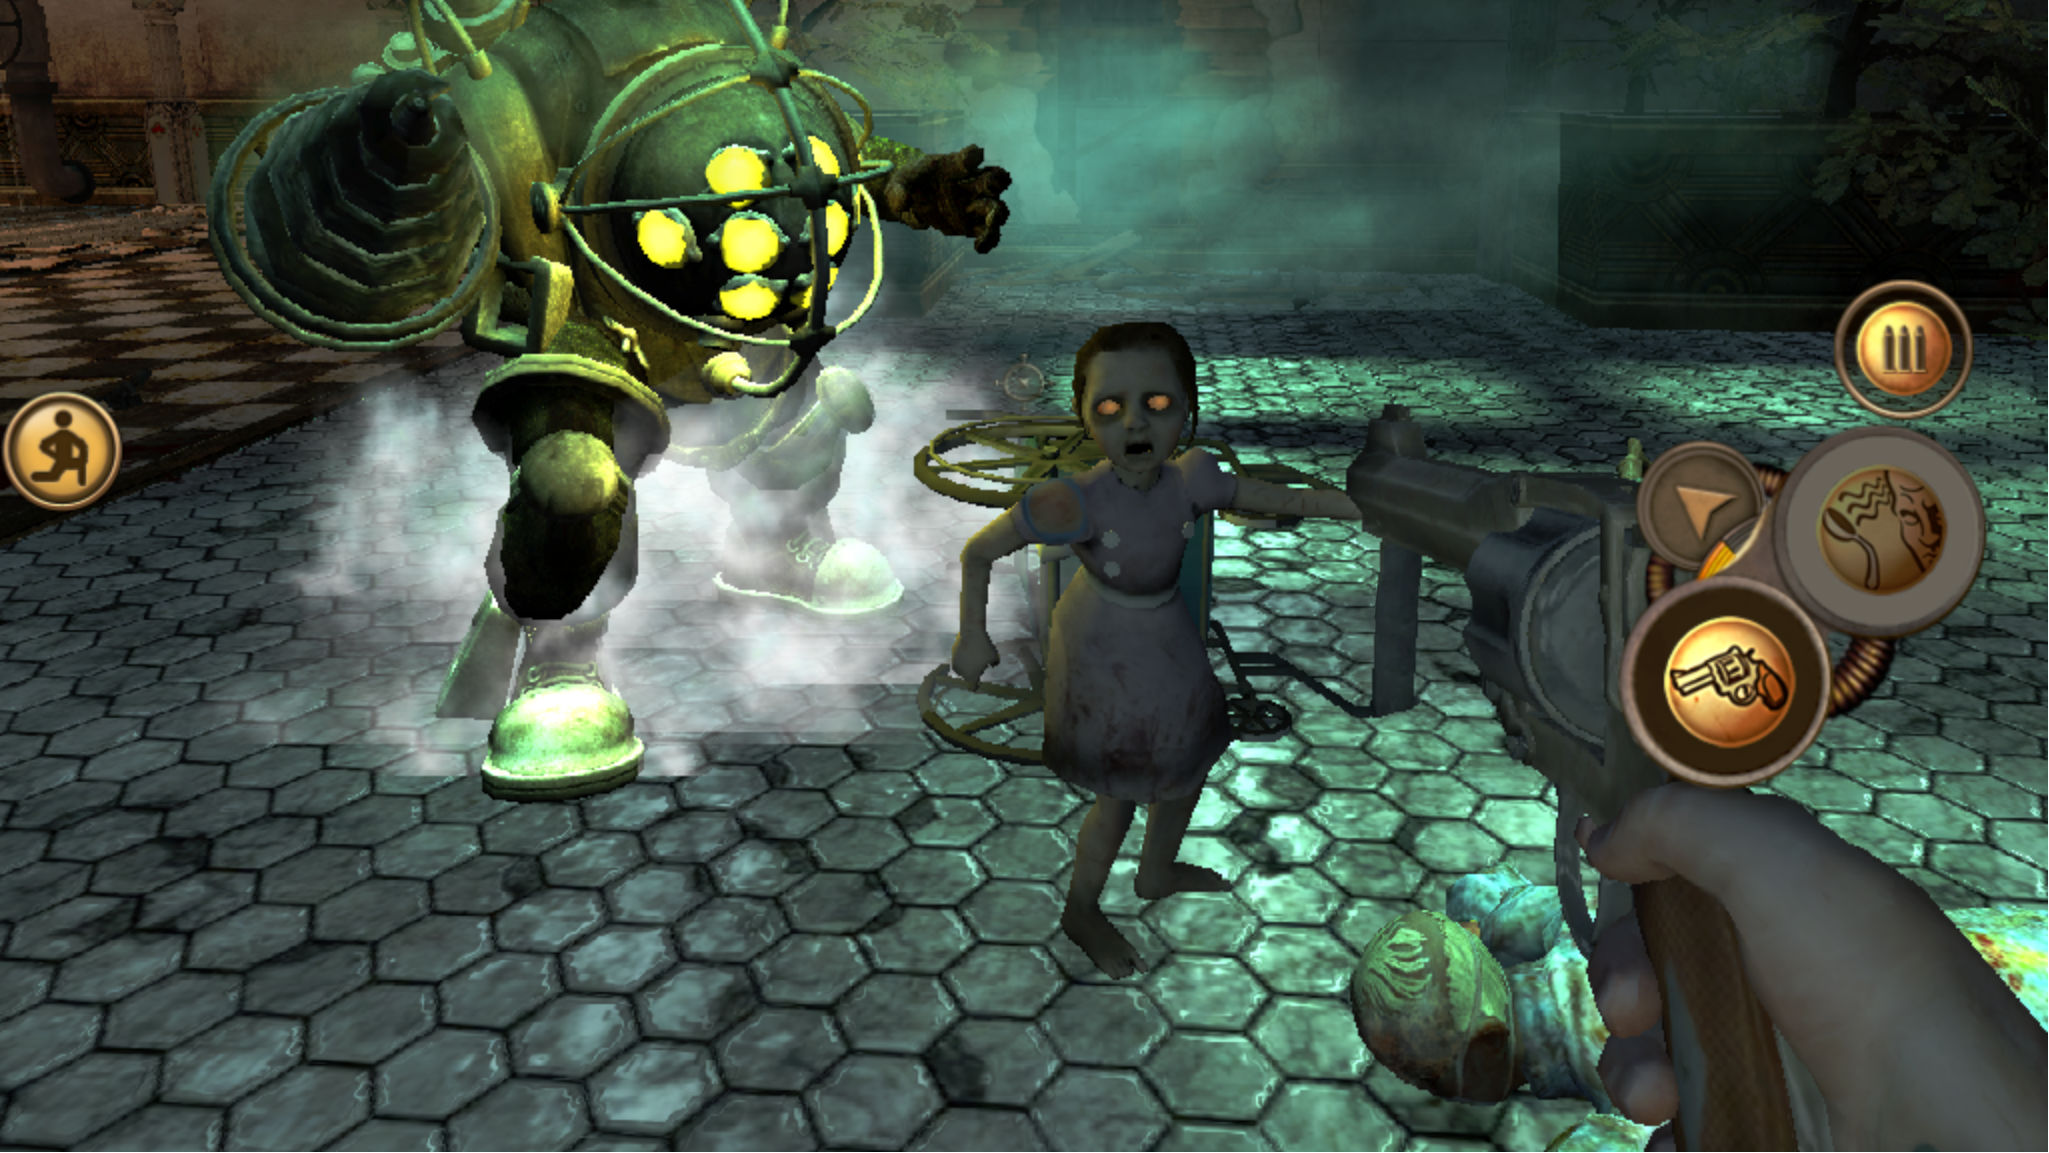 BioShock is coming to iOS